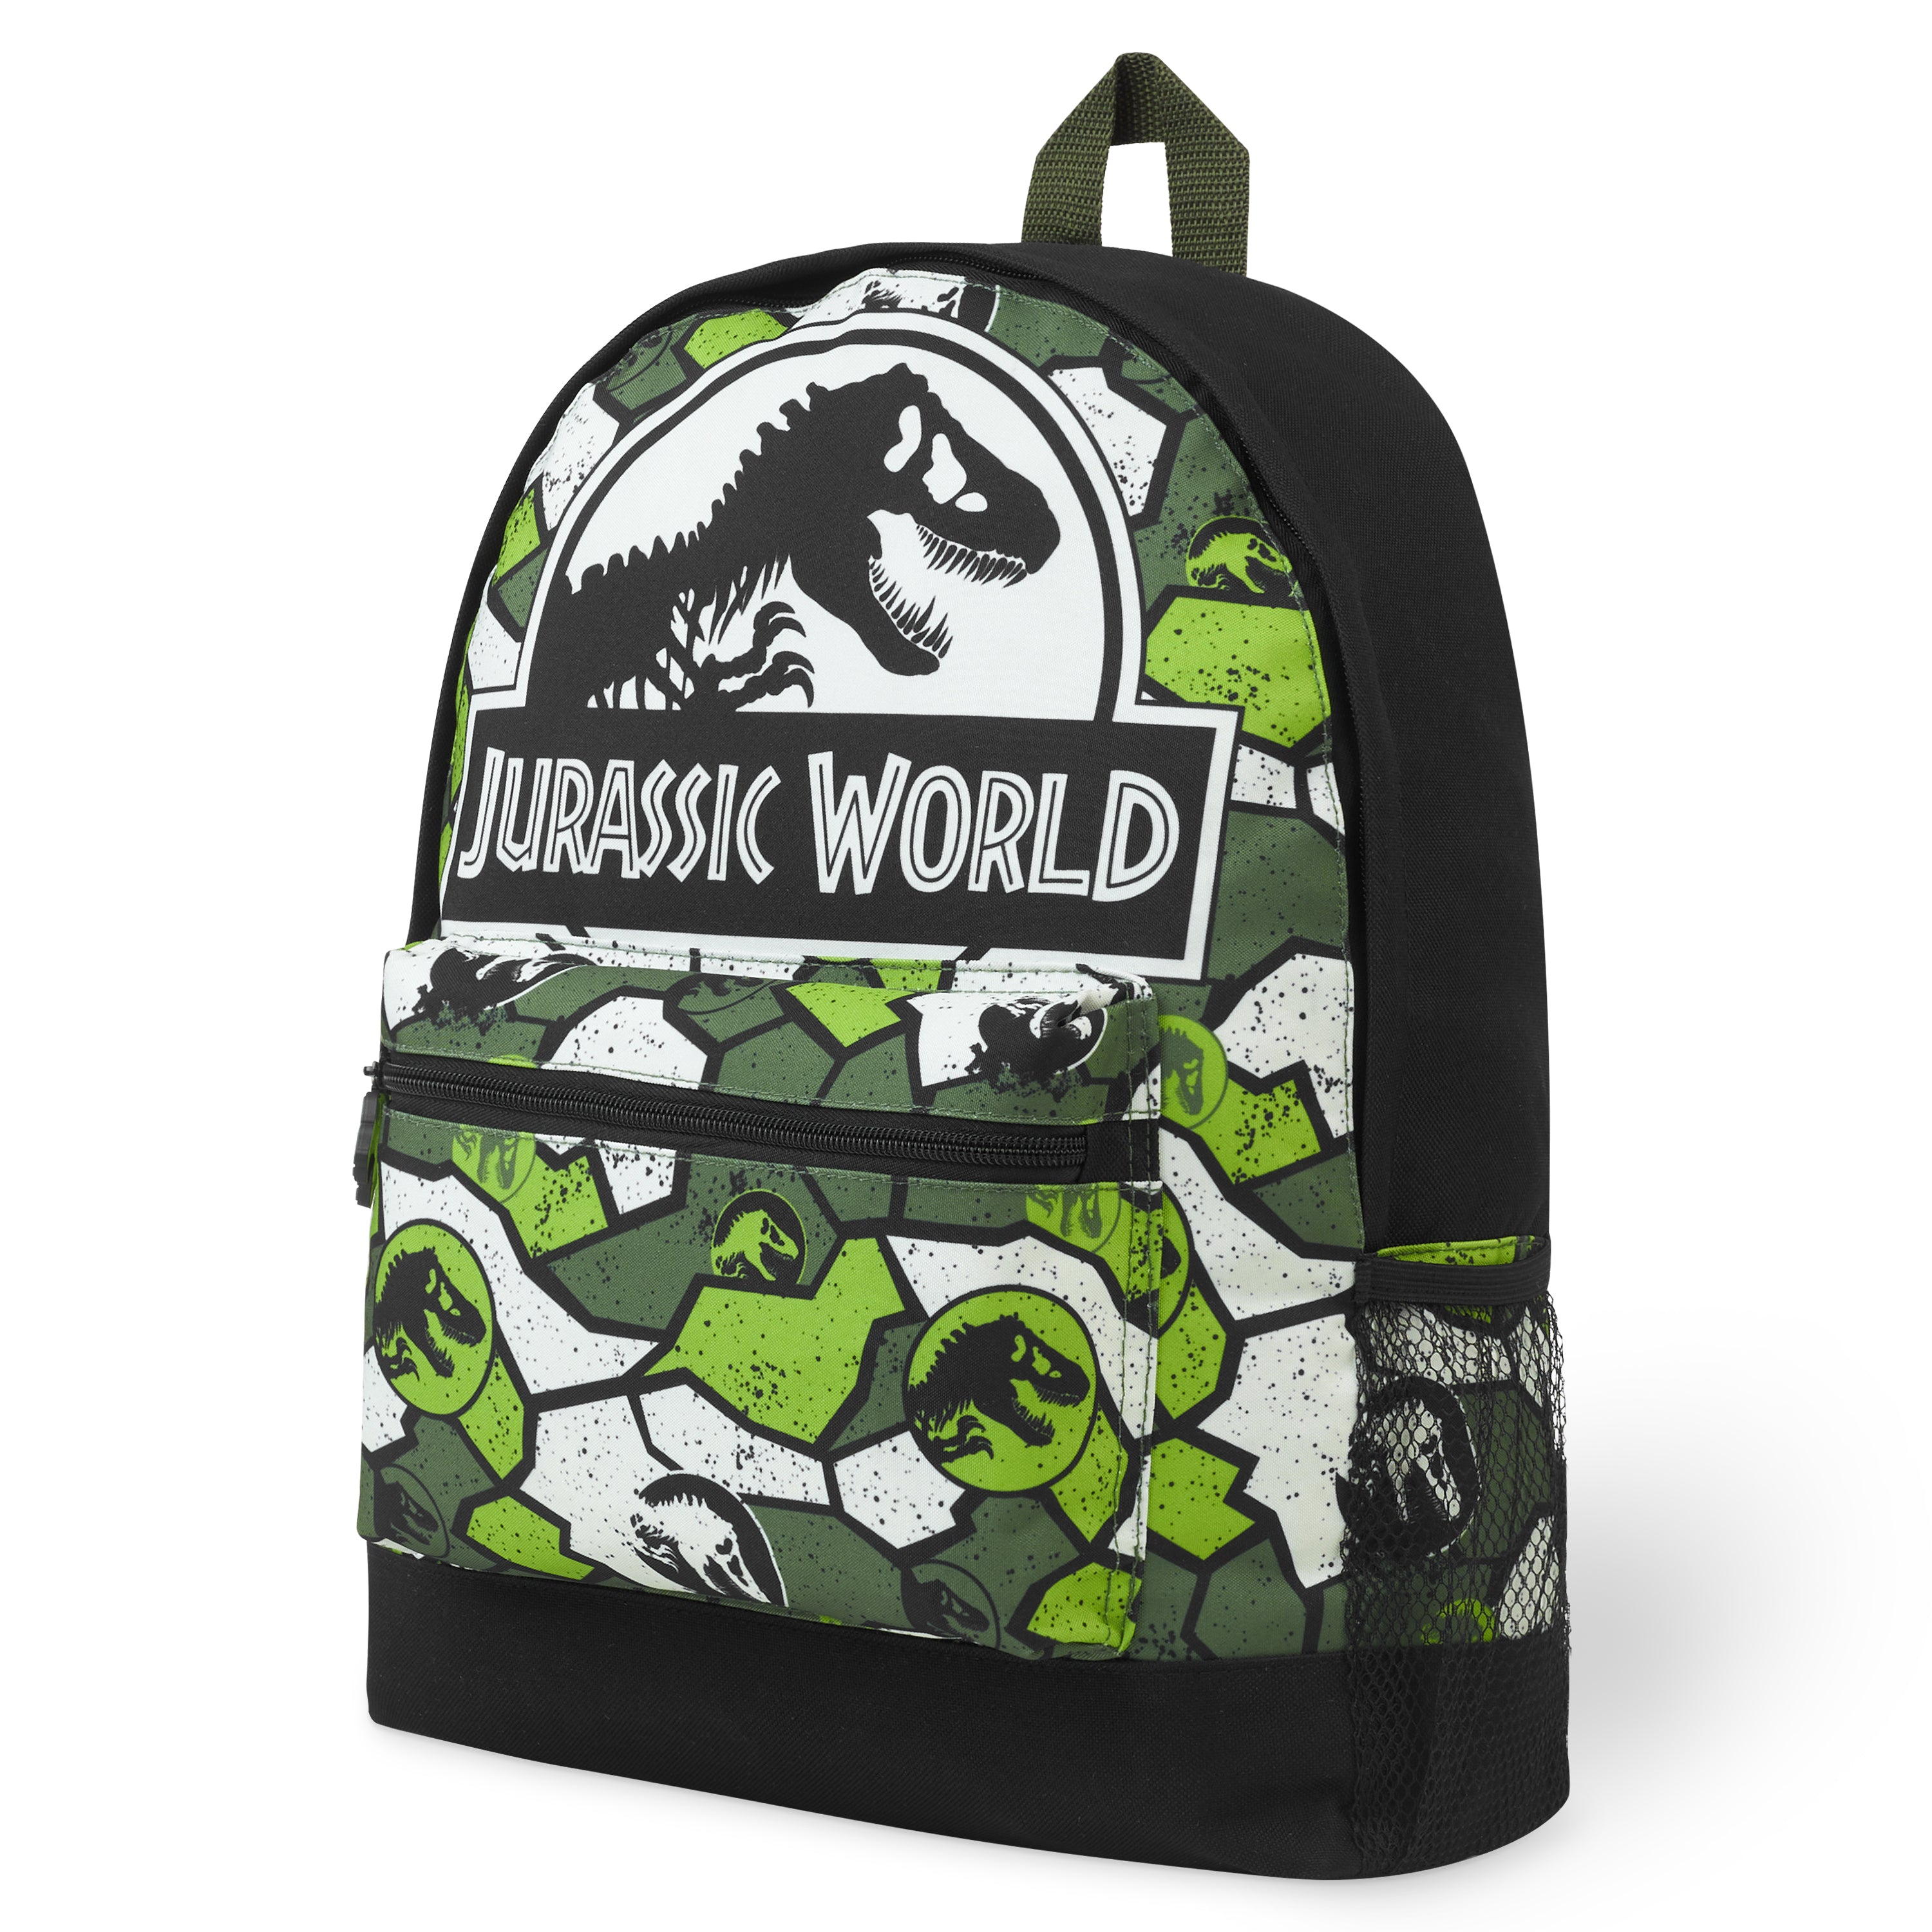 Jurassic World Backpack with Camouflage Print & Sequin Design Boys ...